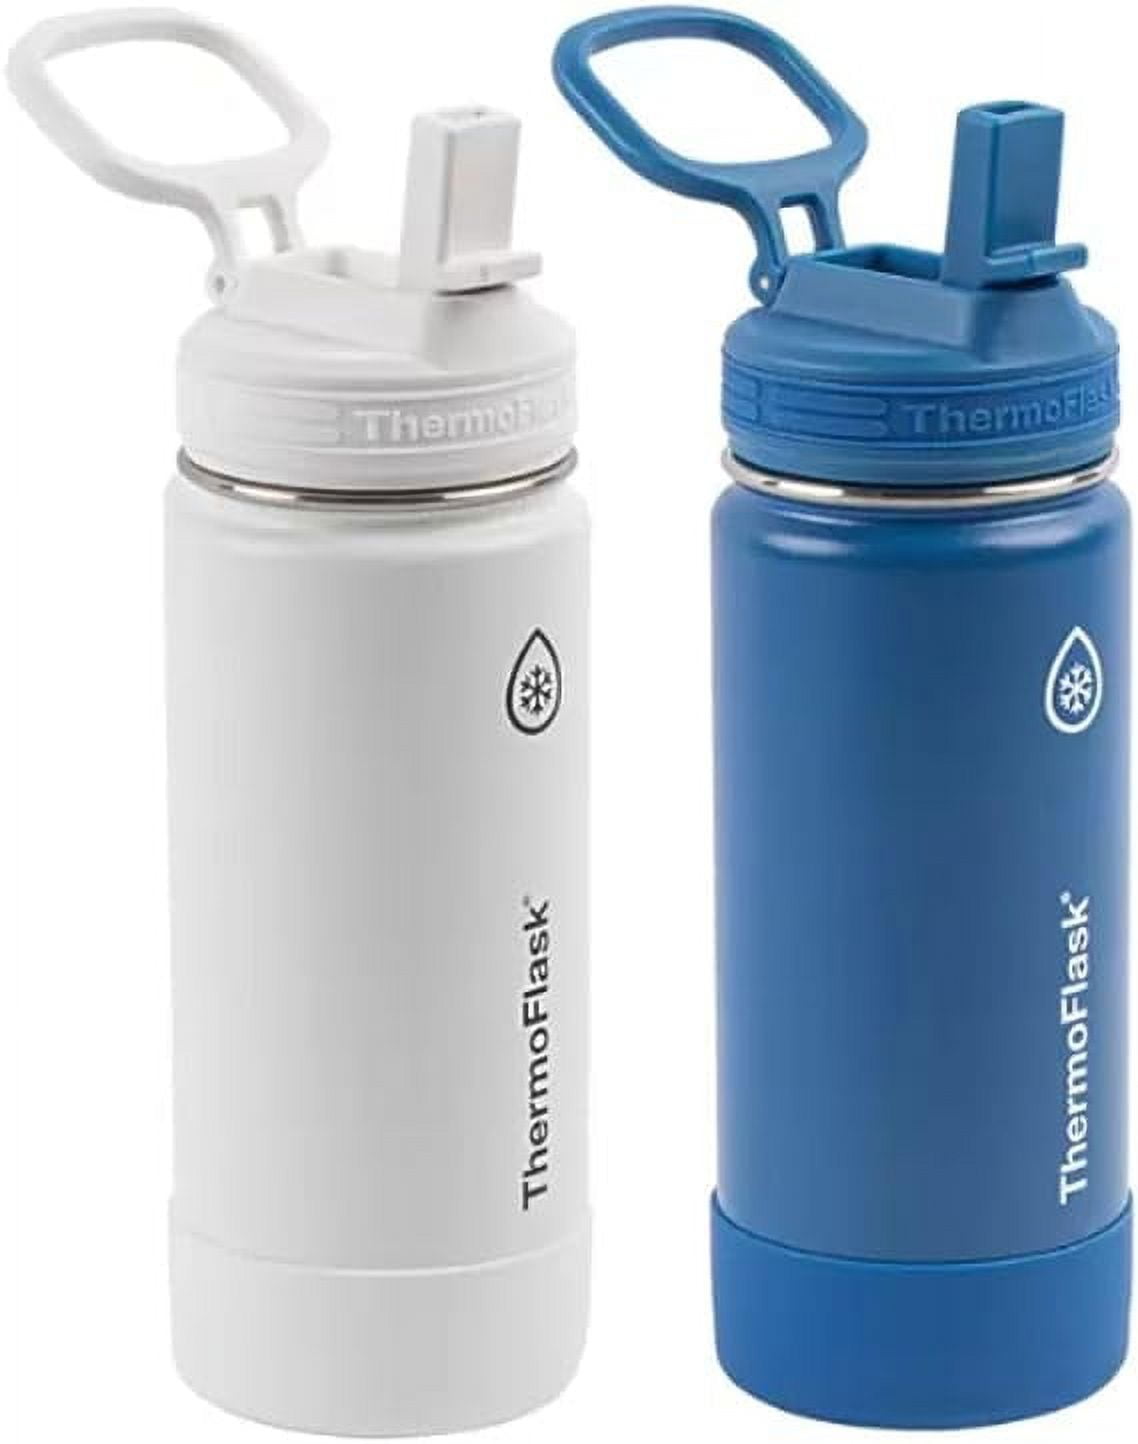 ThermoFlask 16oz Stainless Steel, Vacuum Insulated Water Bottle Blue NWOB